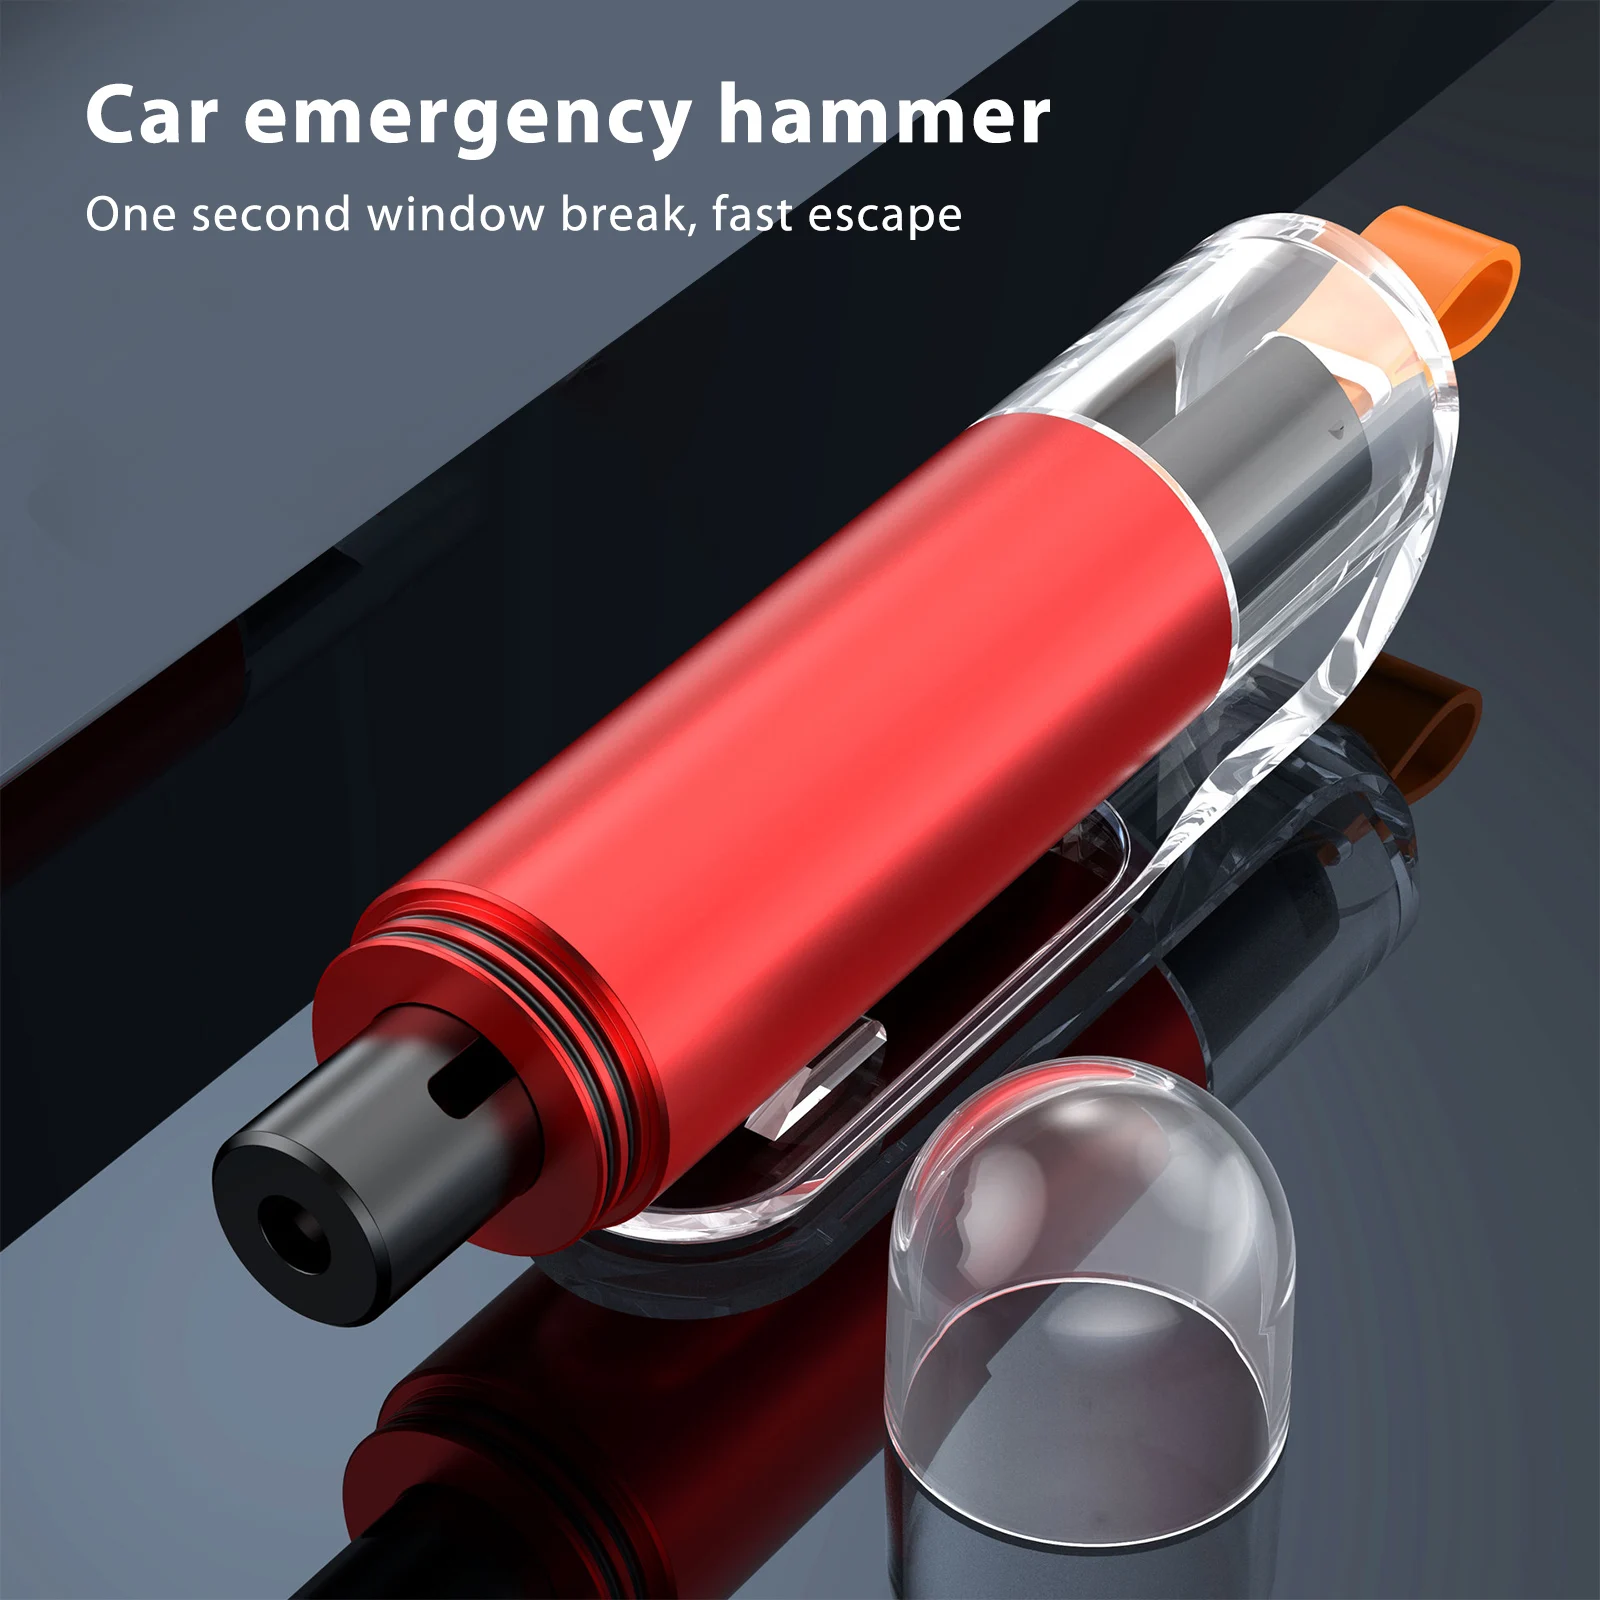 

Car Safety Hammer Emergency Escape Window Glass Punch Breaker with Seat Belt Cutter 2-in-1 Auto Rescue Life Saving Survival Tool